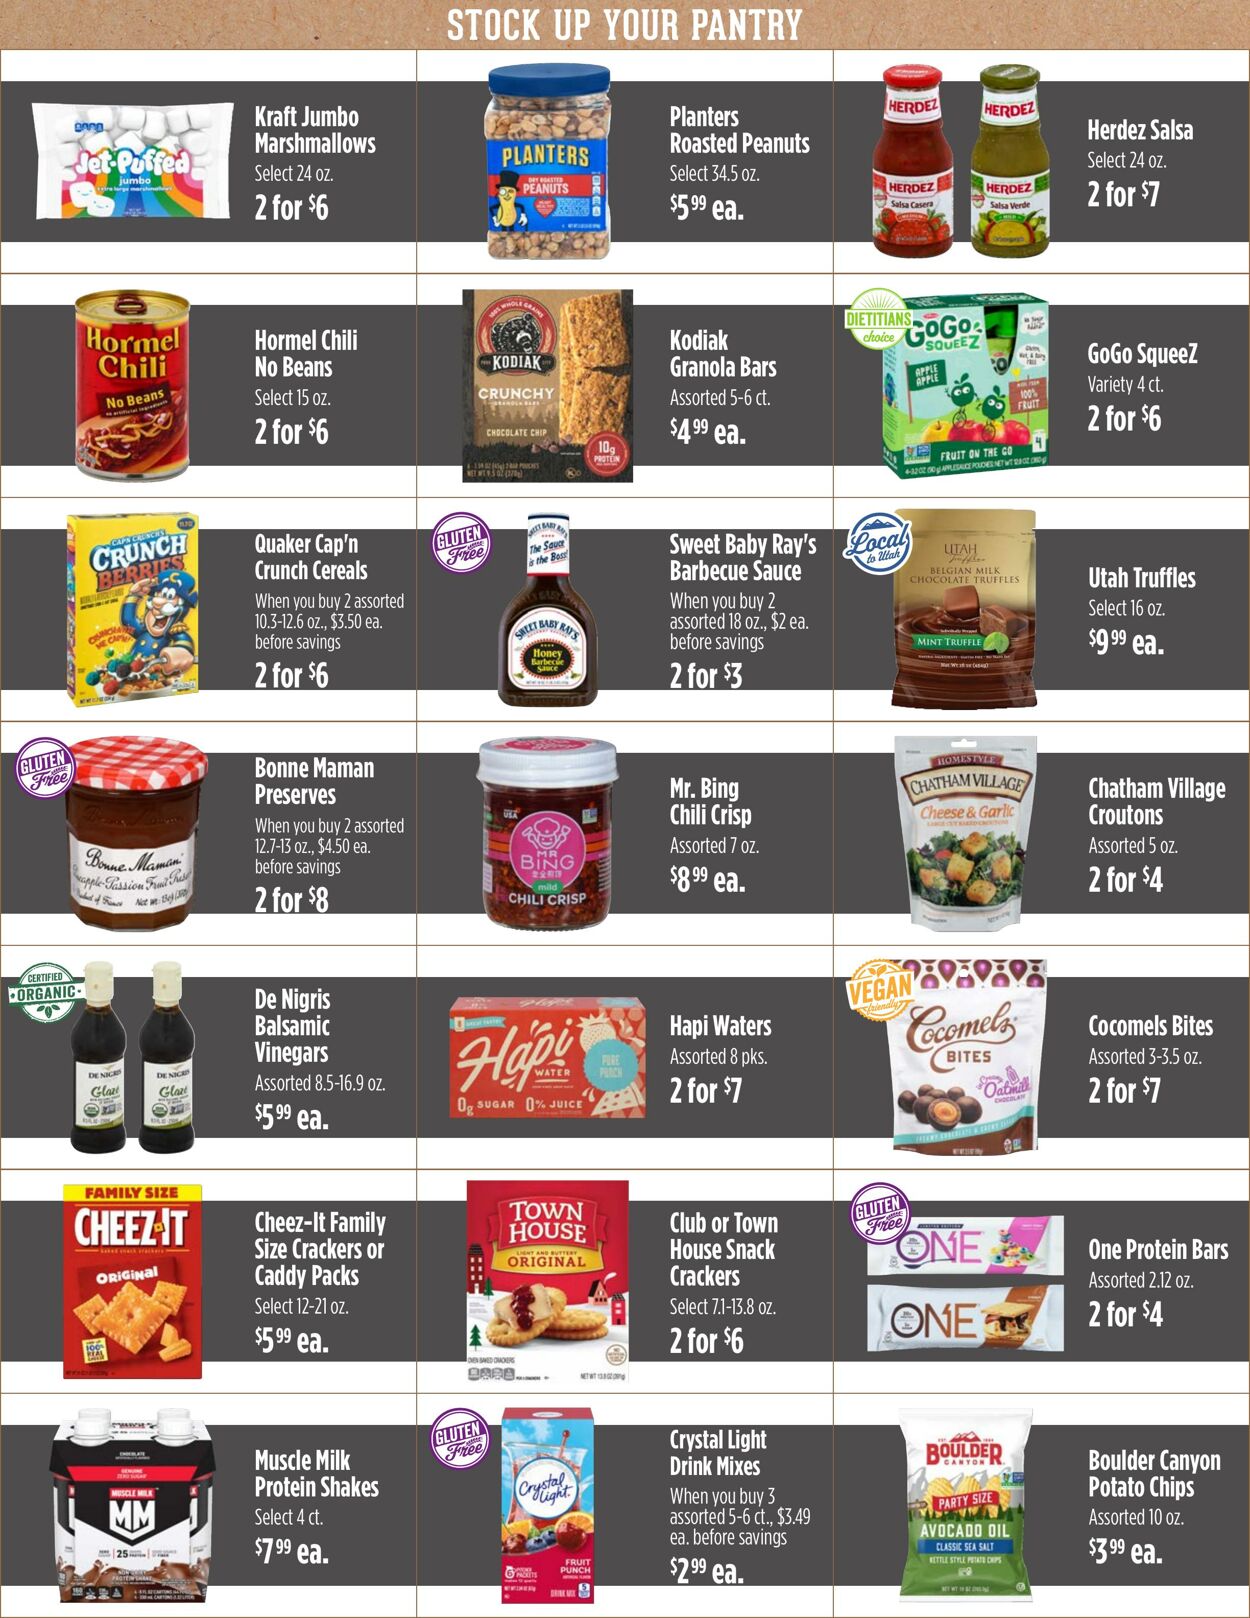 Weekly ad Harmons Grocery 05/28/2024 - 06/03/2024